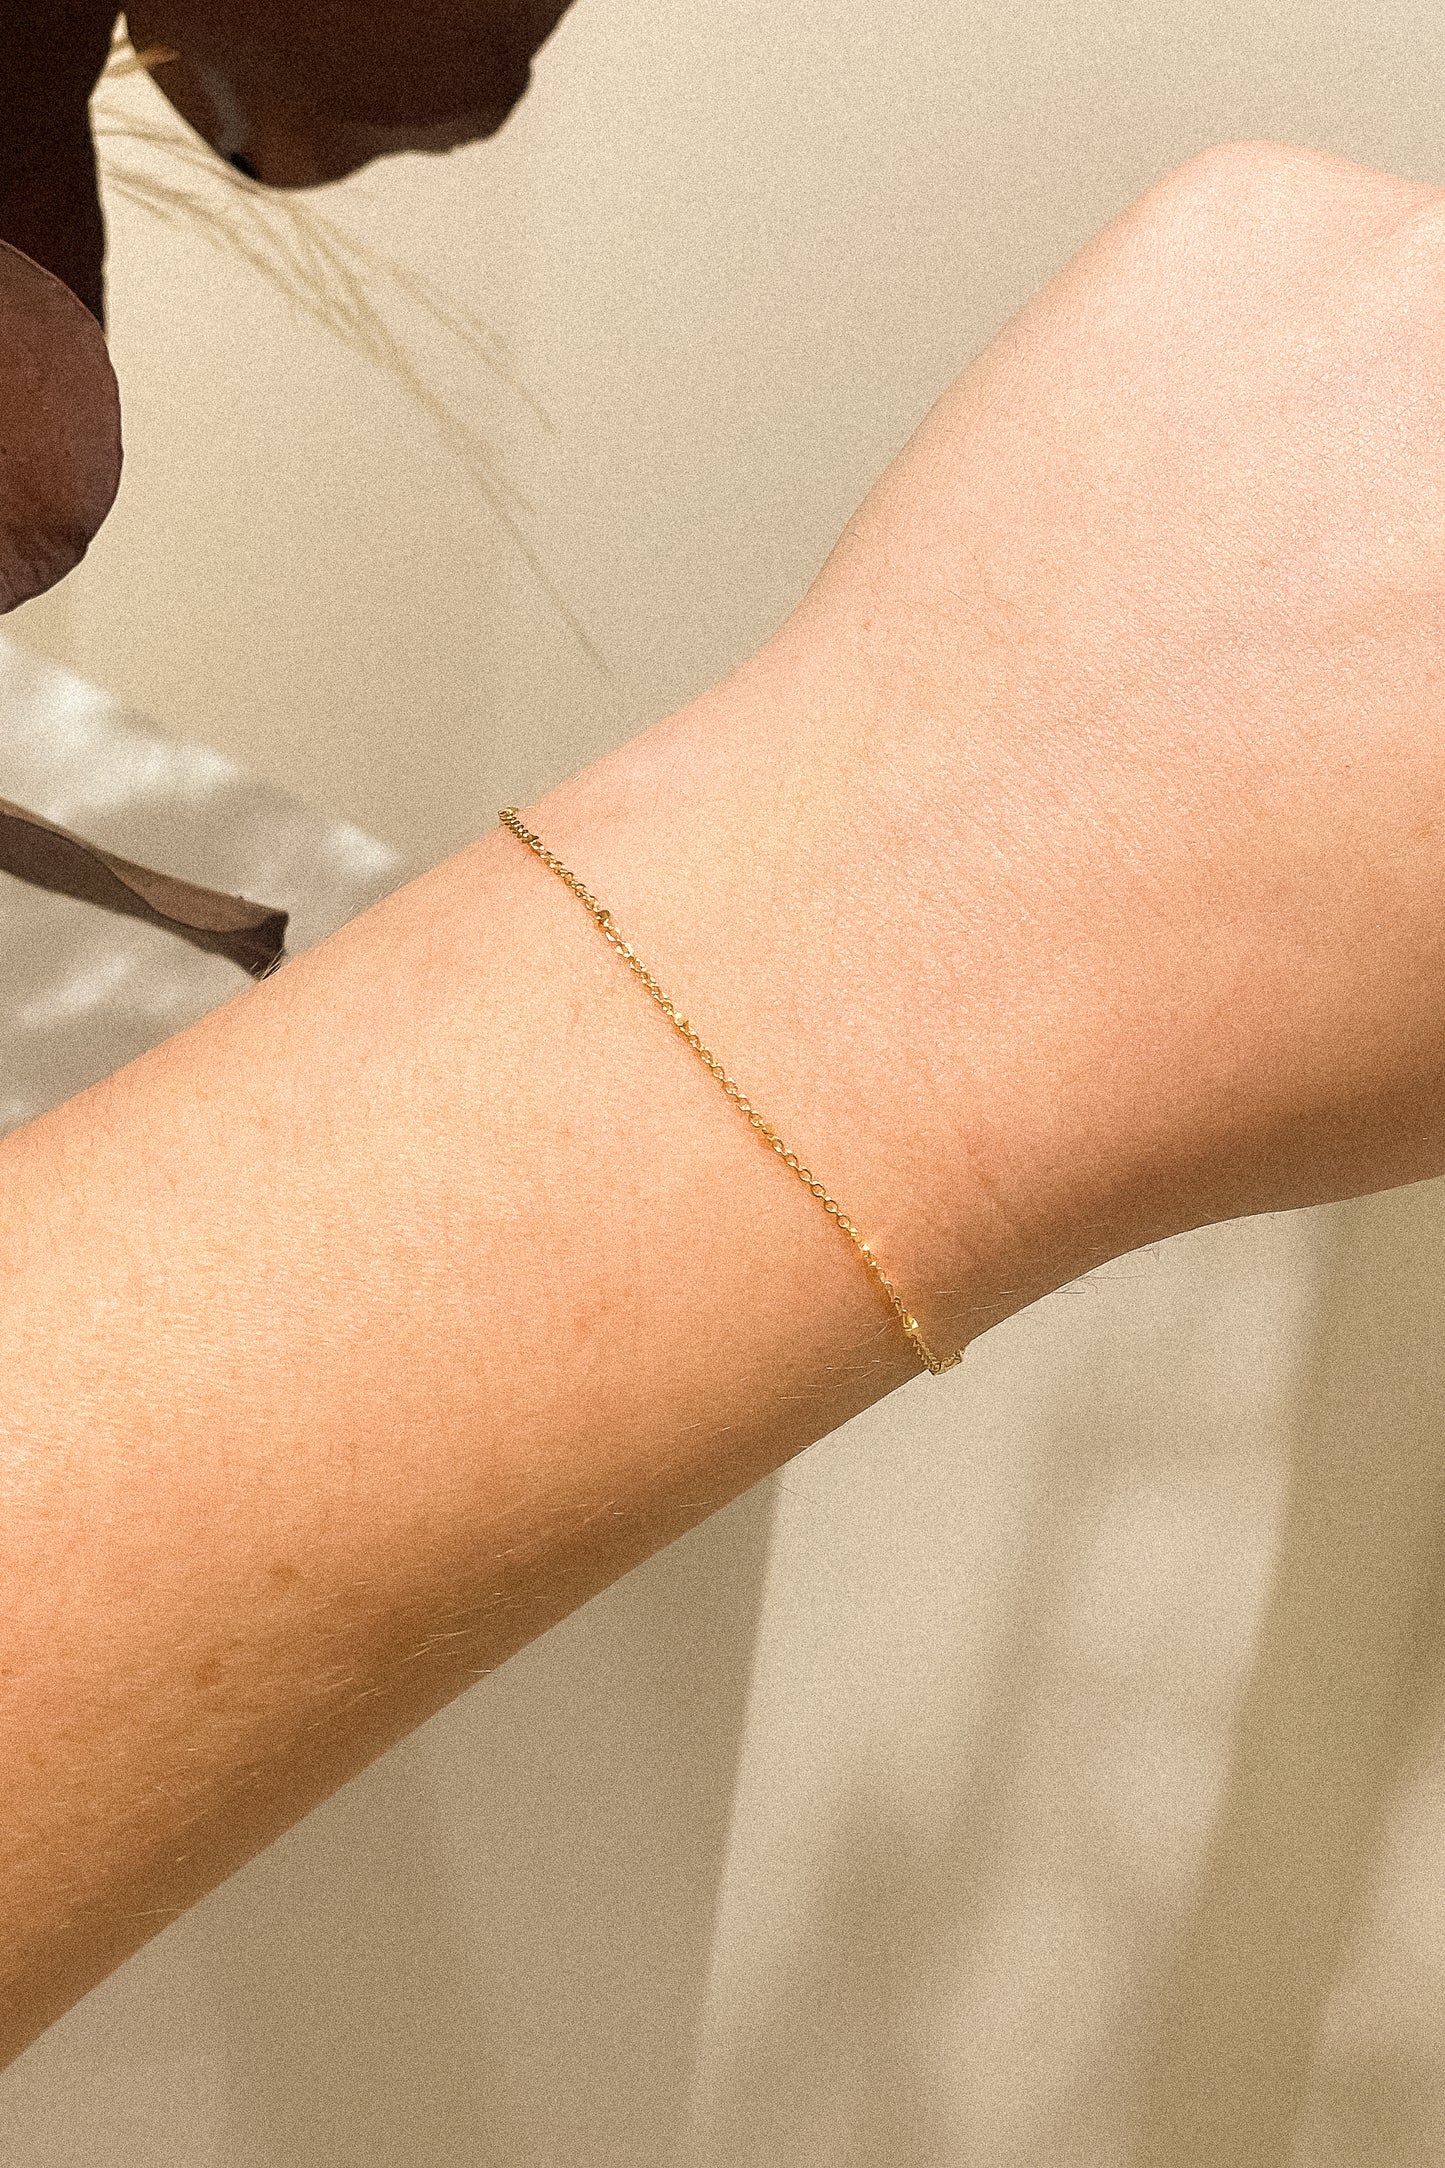 Satellite Chain Bracelet in Solid 9k Yellow Gold